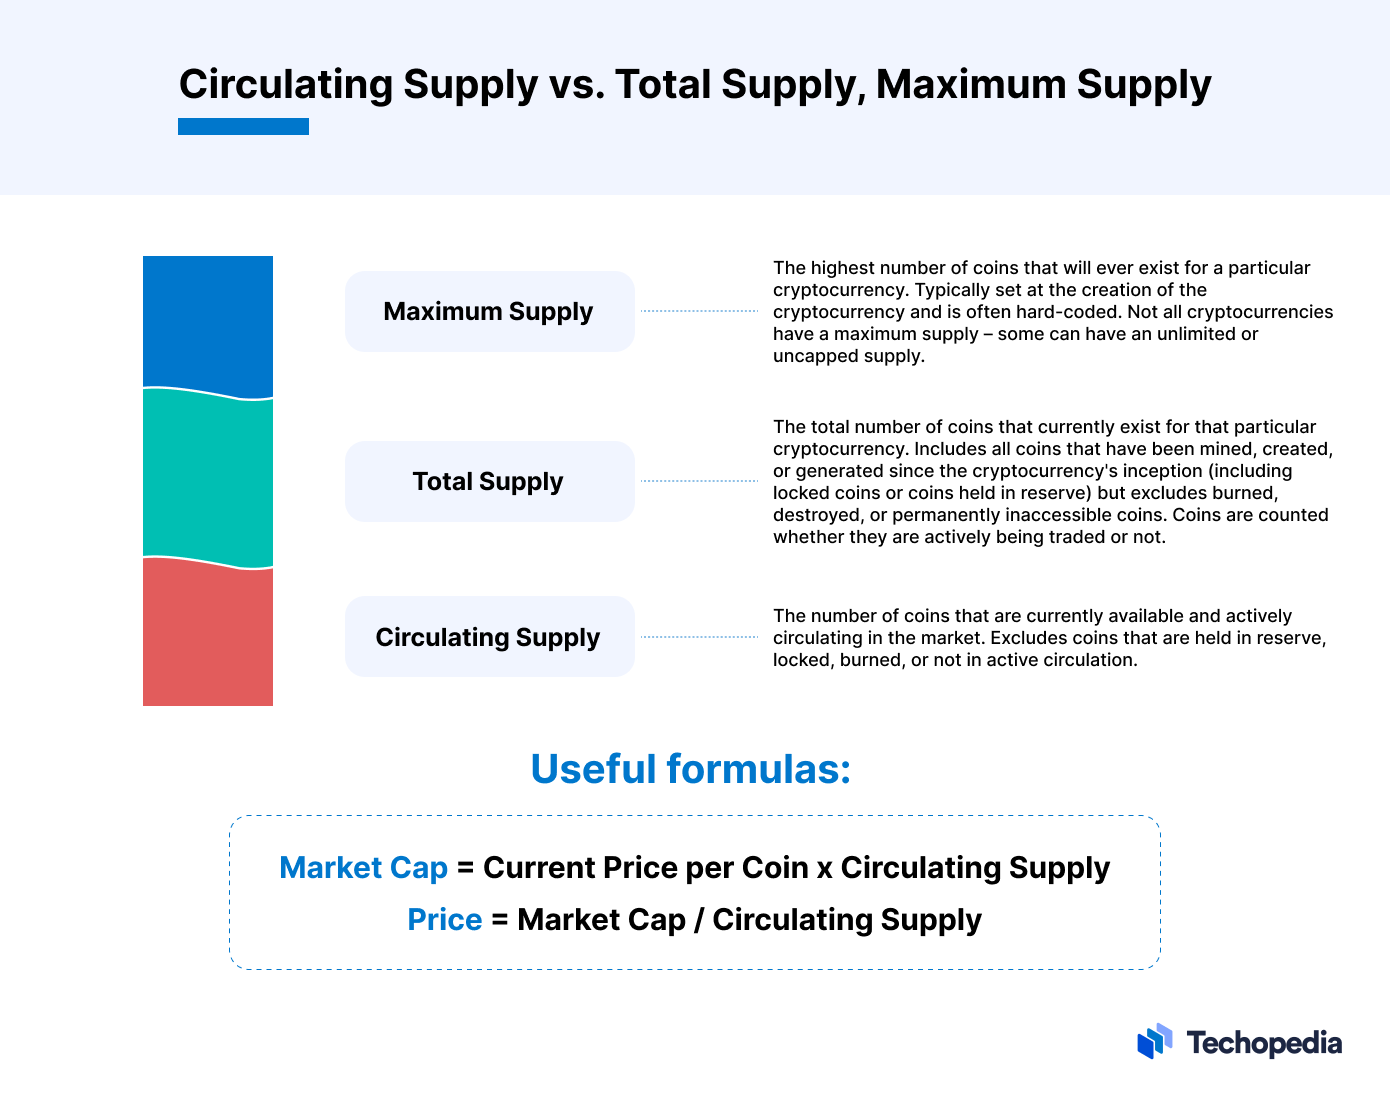 An infographic of circulating supply vs maximum supply vs total supply